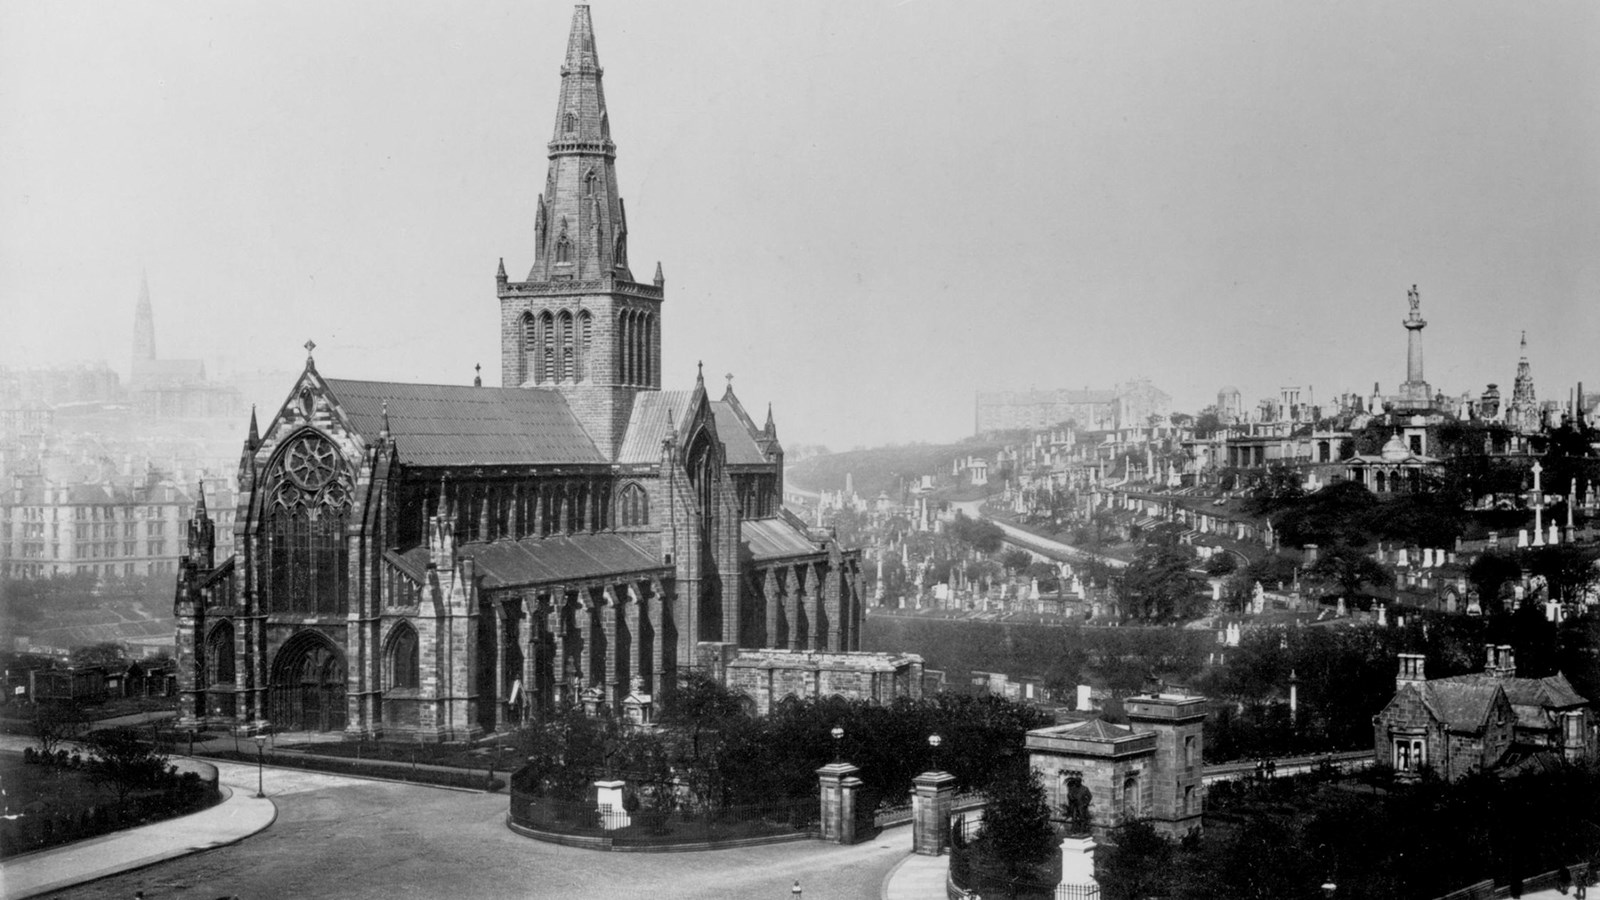 A black and white photo of The Glasgow Necropolis with the city in the background. People are sitting on benches on the streets and a horse and carriage is bypassing.